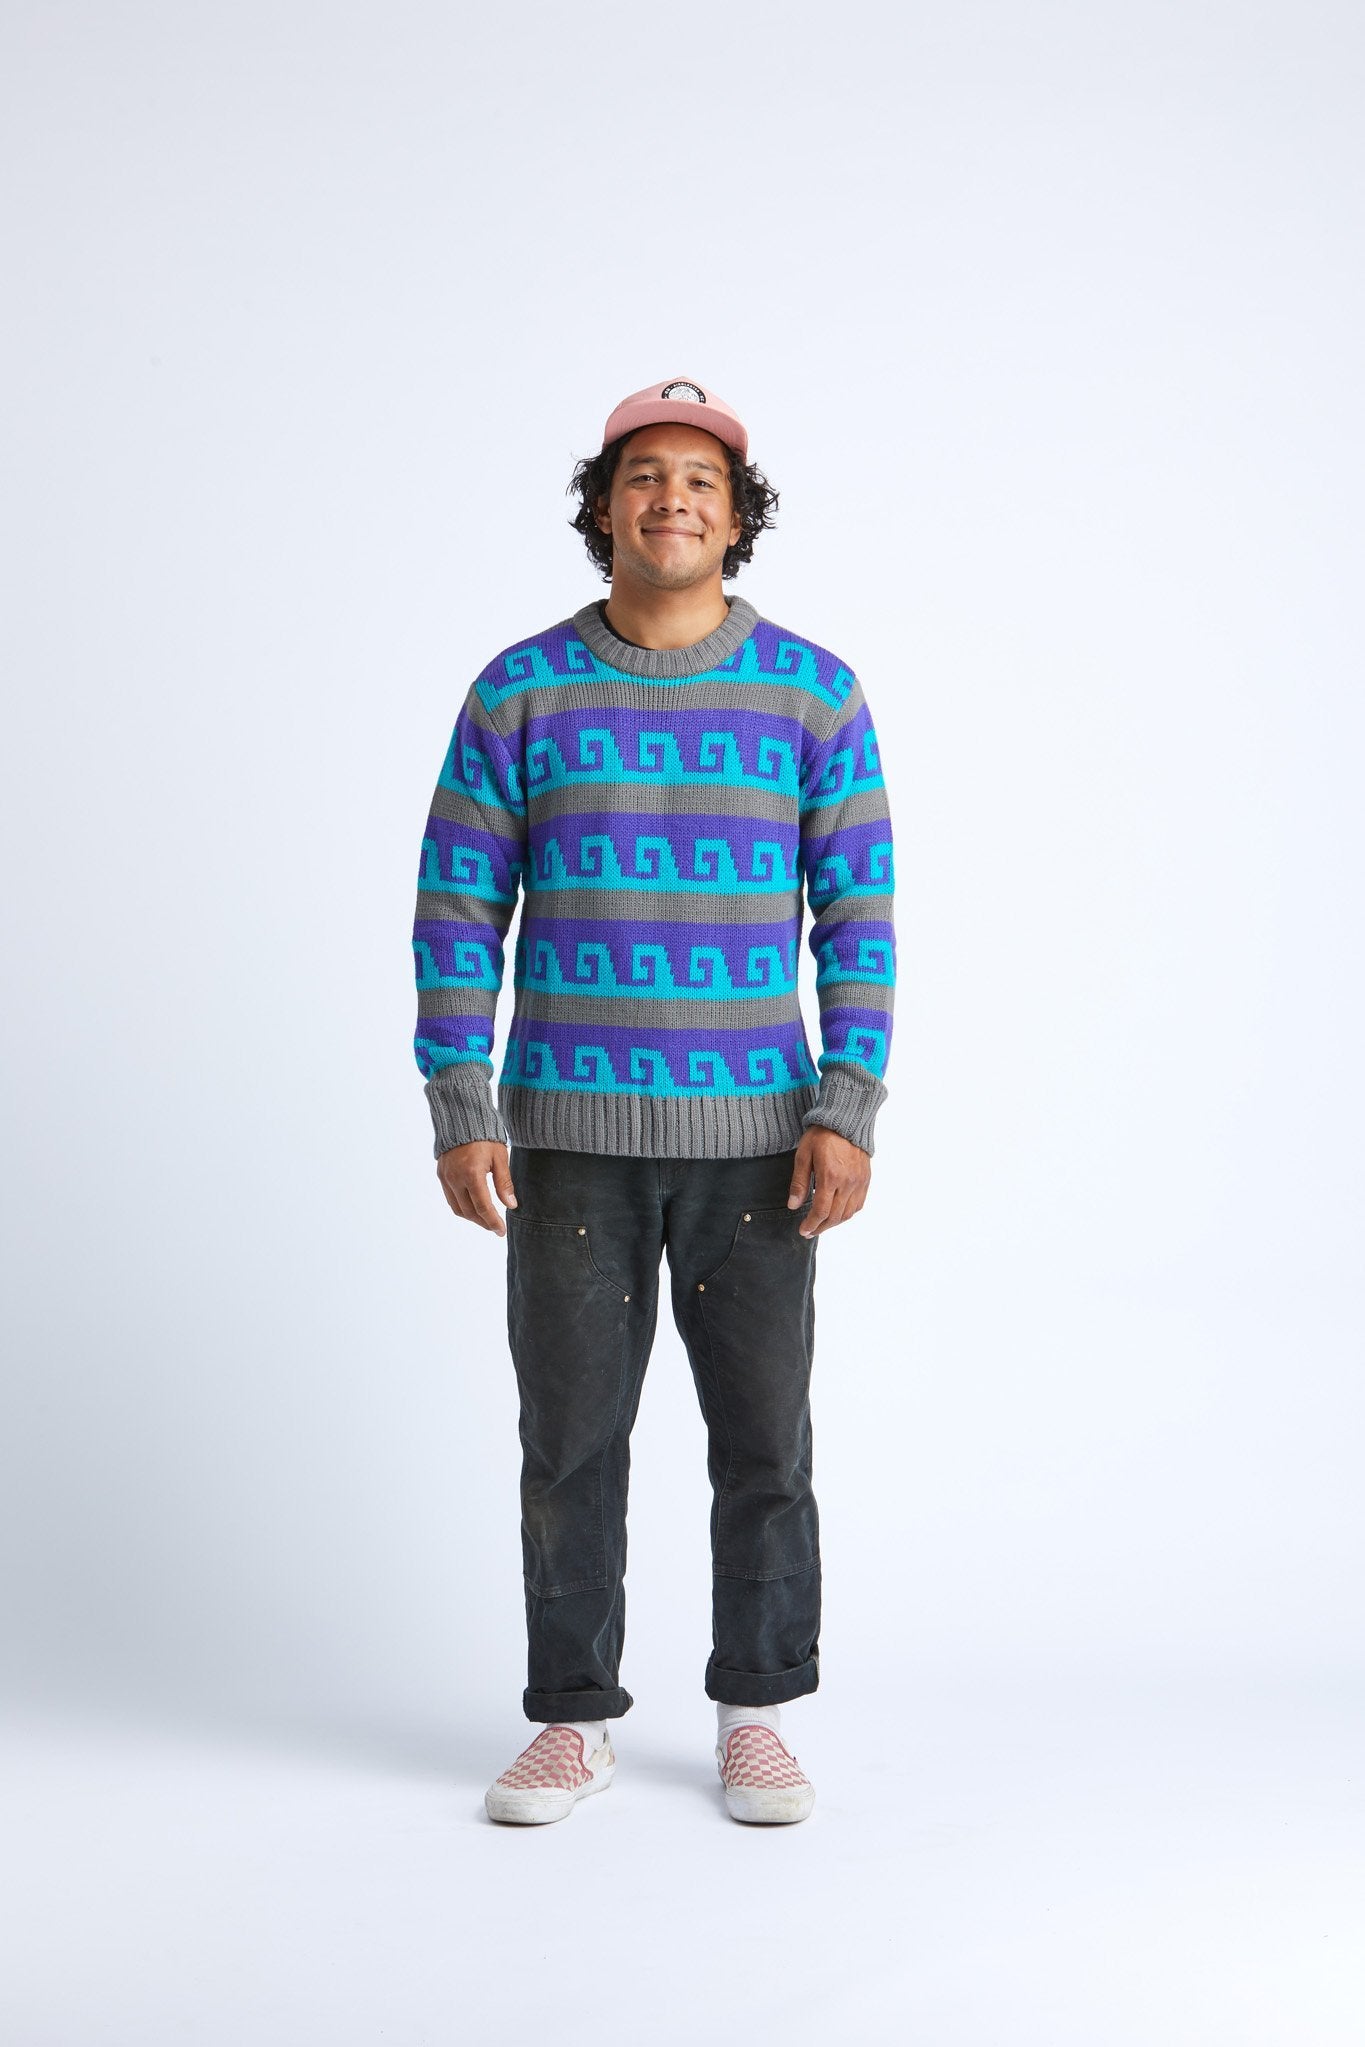 AIRBLASTER KNIT MEN'S PARTY SWEATER